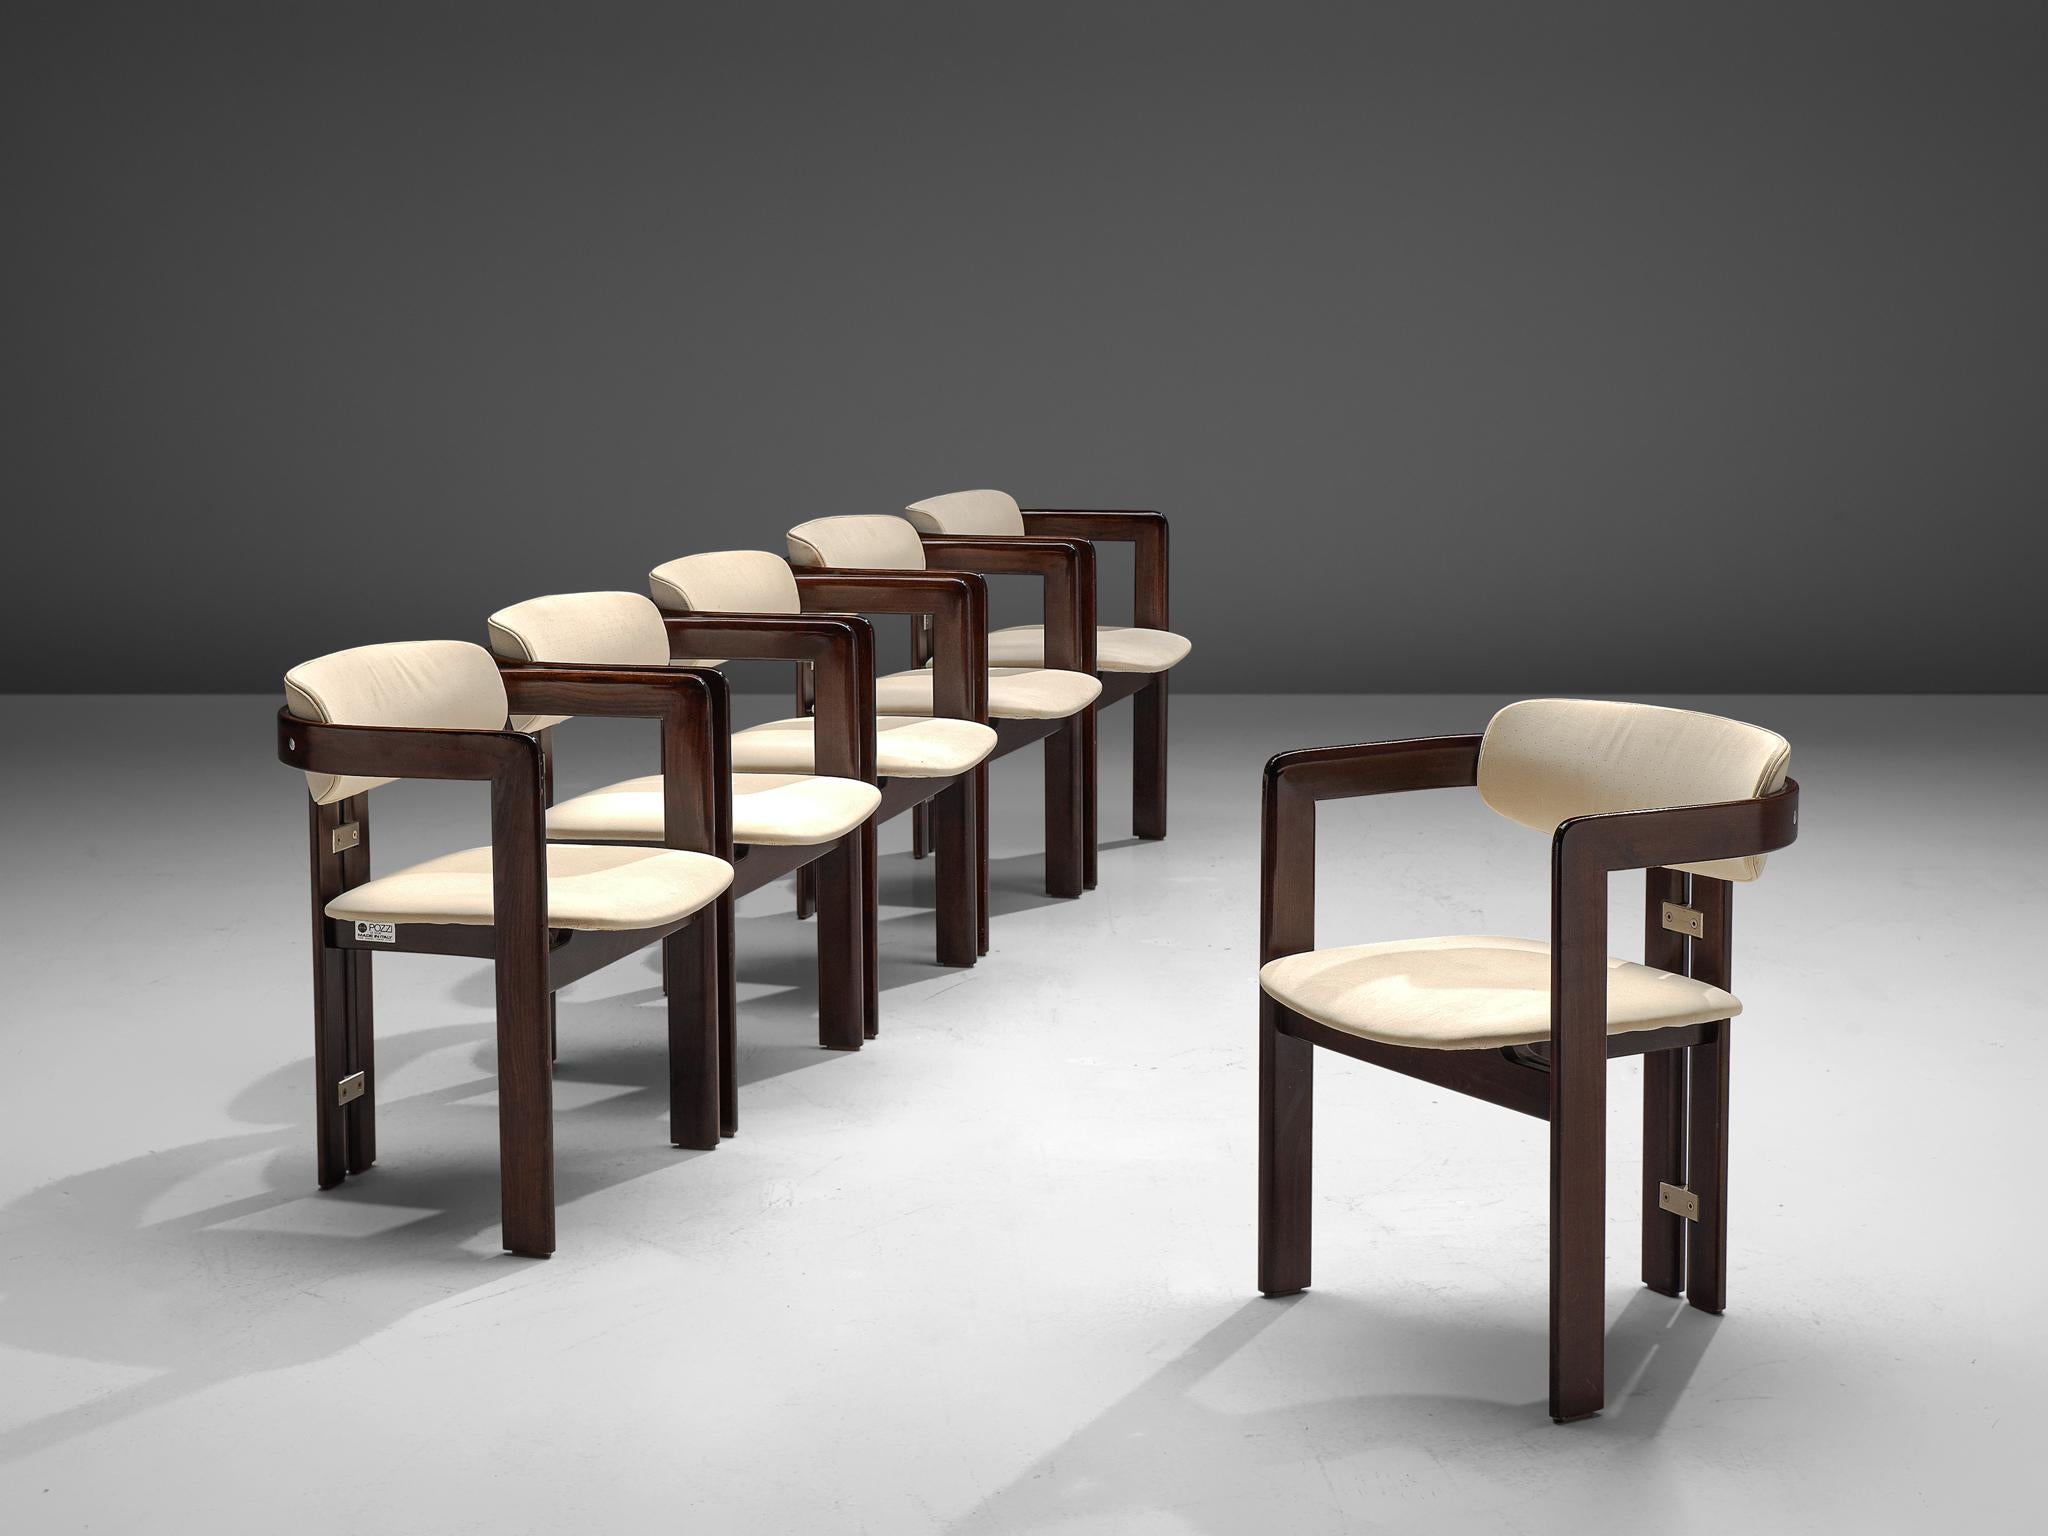 Augusto Savini for Pozzi, set of 6 ‘Pamplona’ armchairs, fabric, ashwood, metal, Italy, 1960s.

Set of six armchairs in high gloss stained ashwood and crème fabric. The chairs have a unique and characteristic design, simplistic yet very